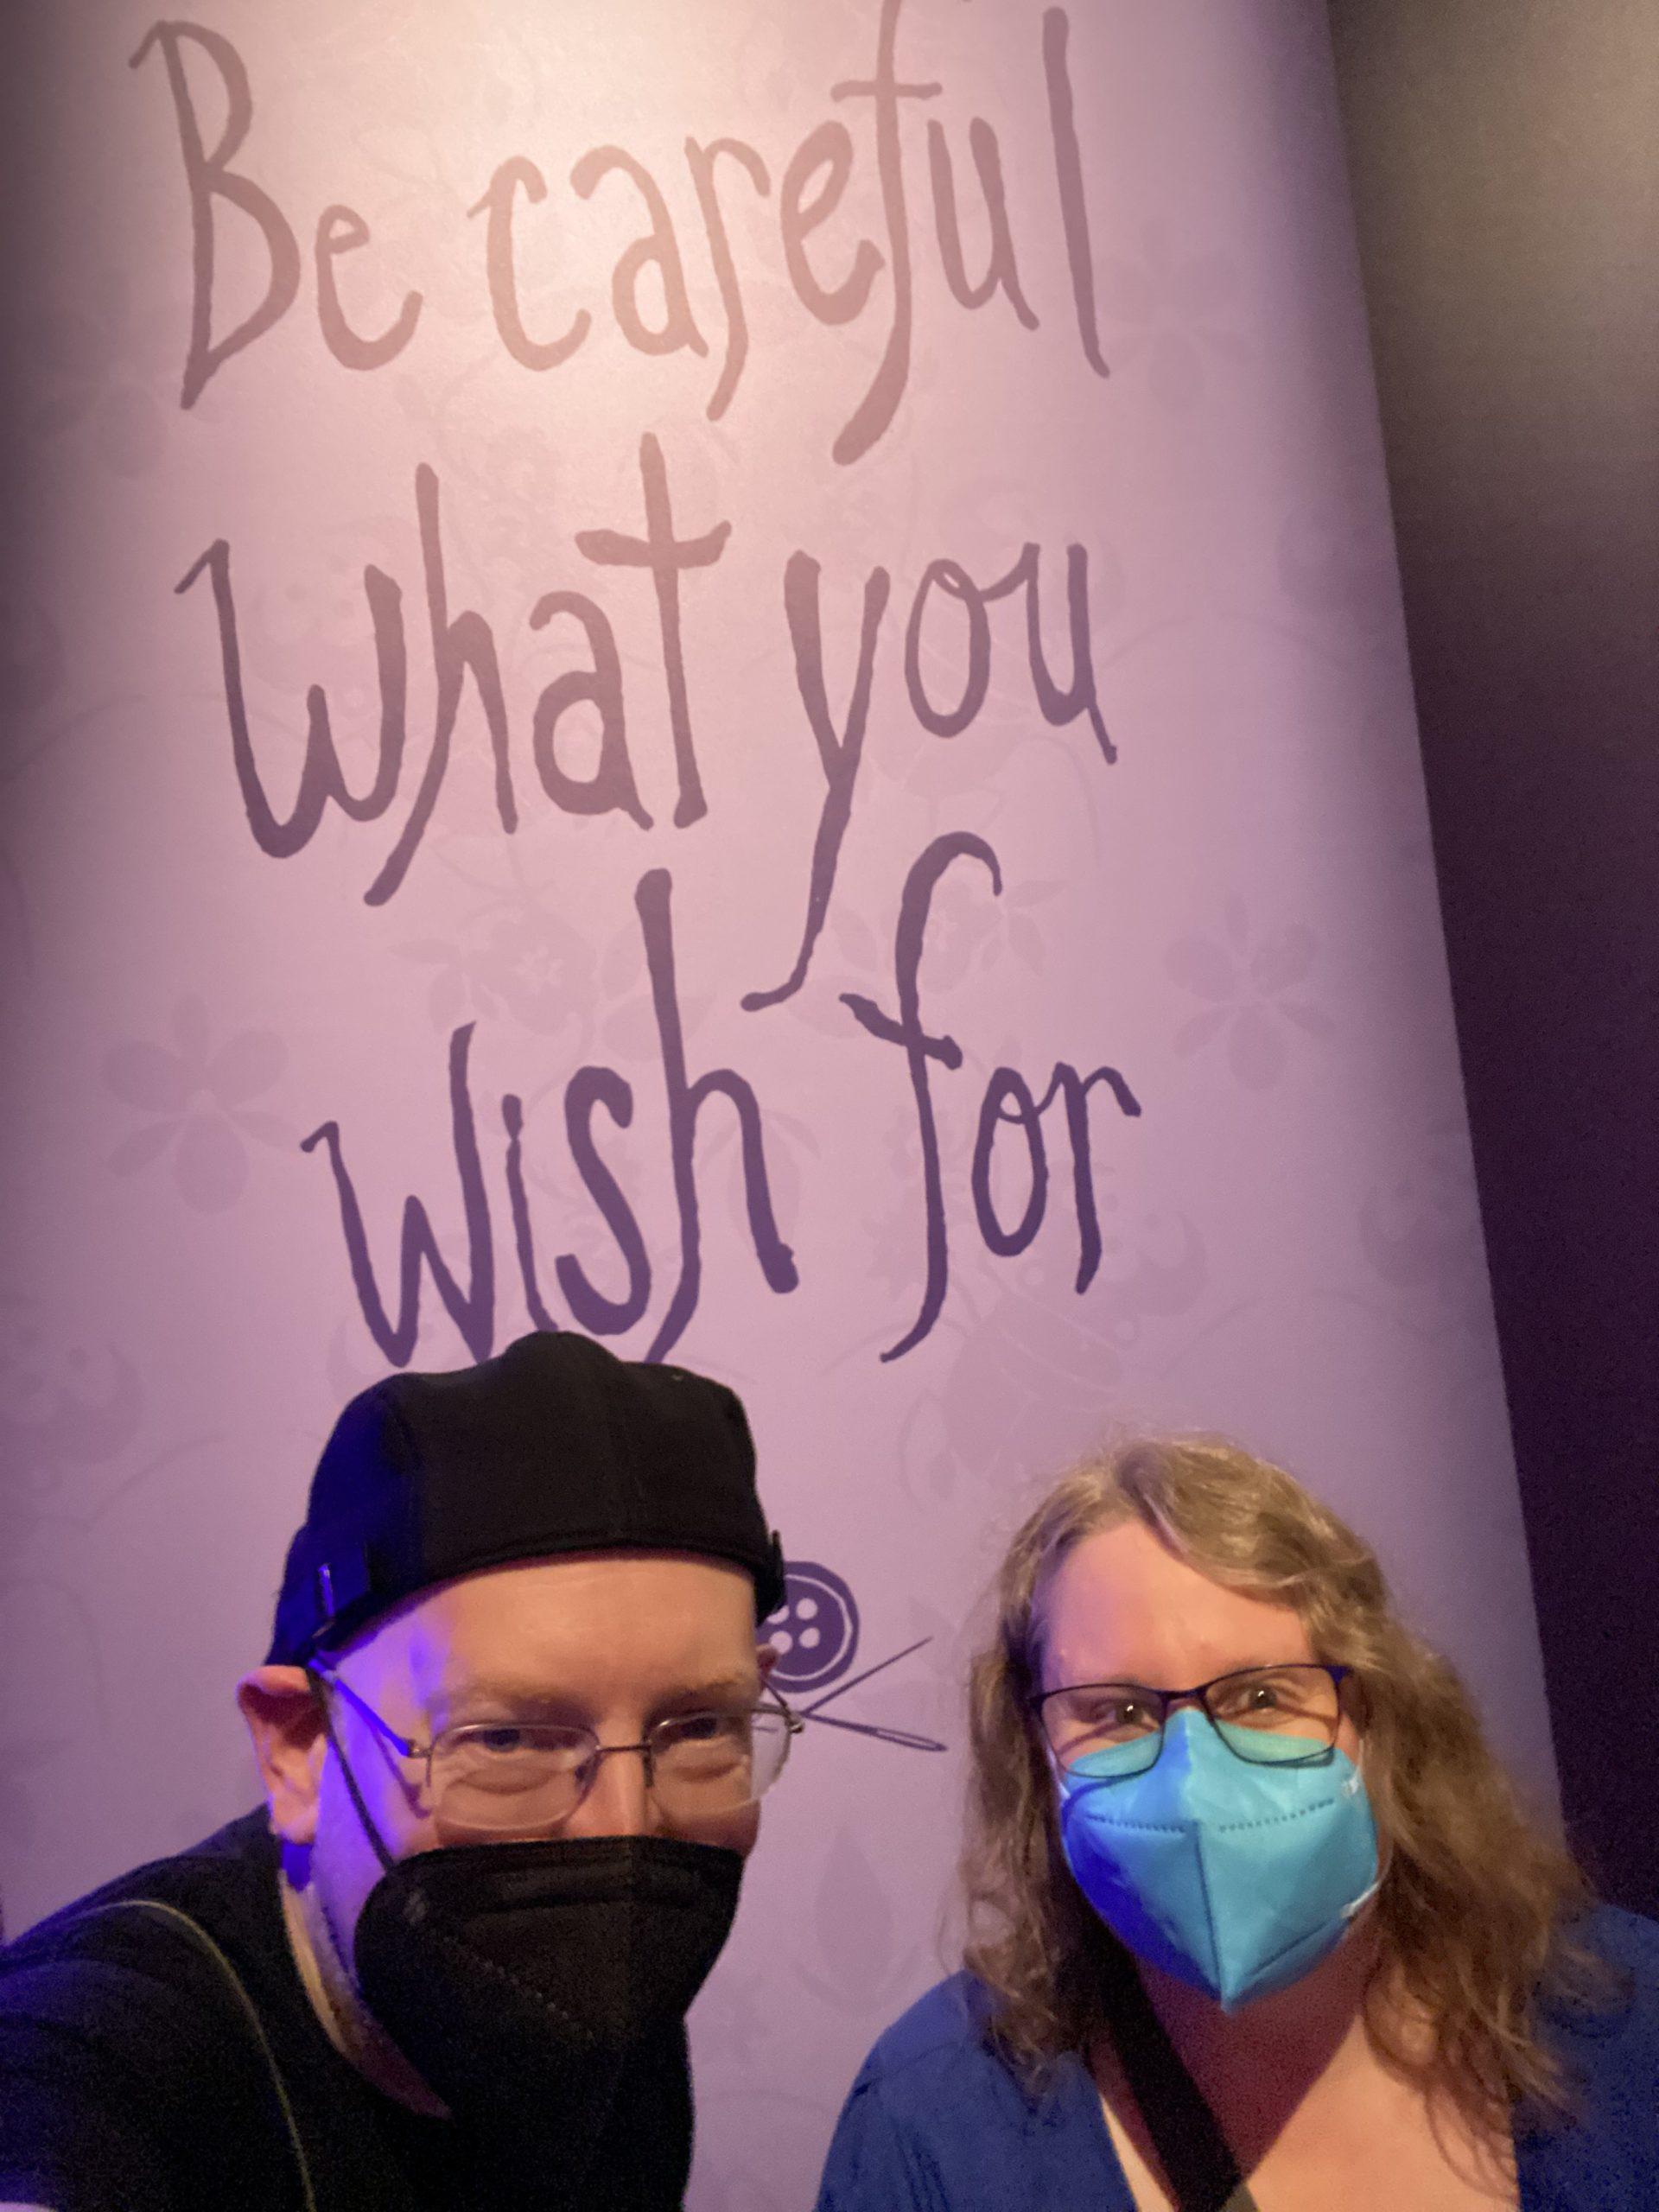 My wife and I in front of a sign saying "be careful what you wish for".